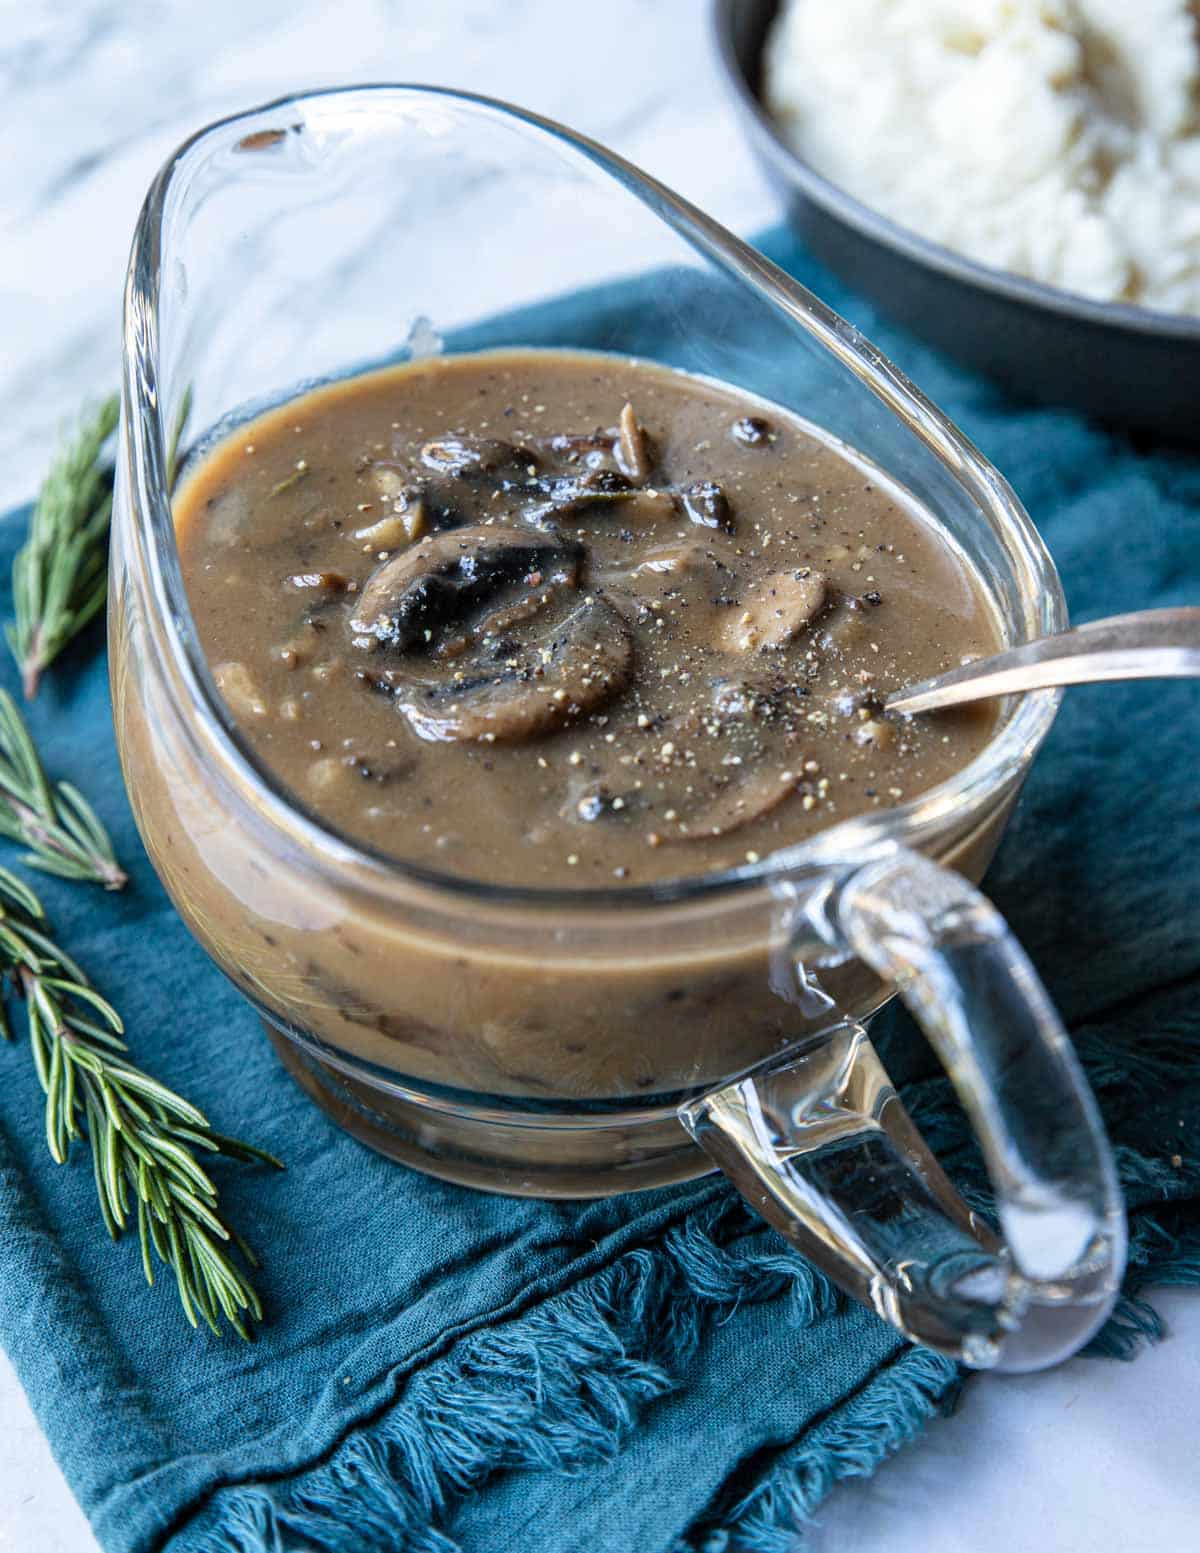 a glass gravy boat with mushroom gravy inside, topped with cracked black pepper